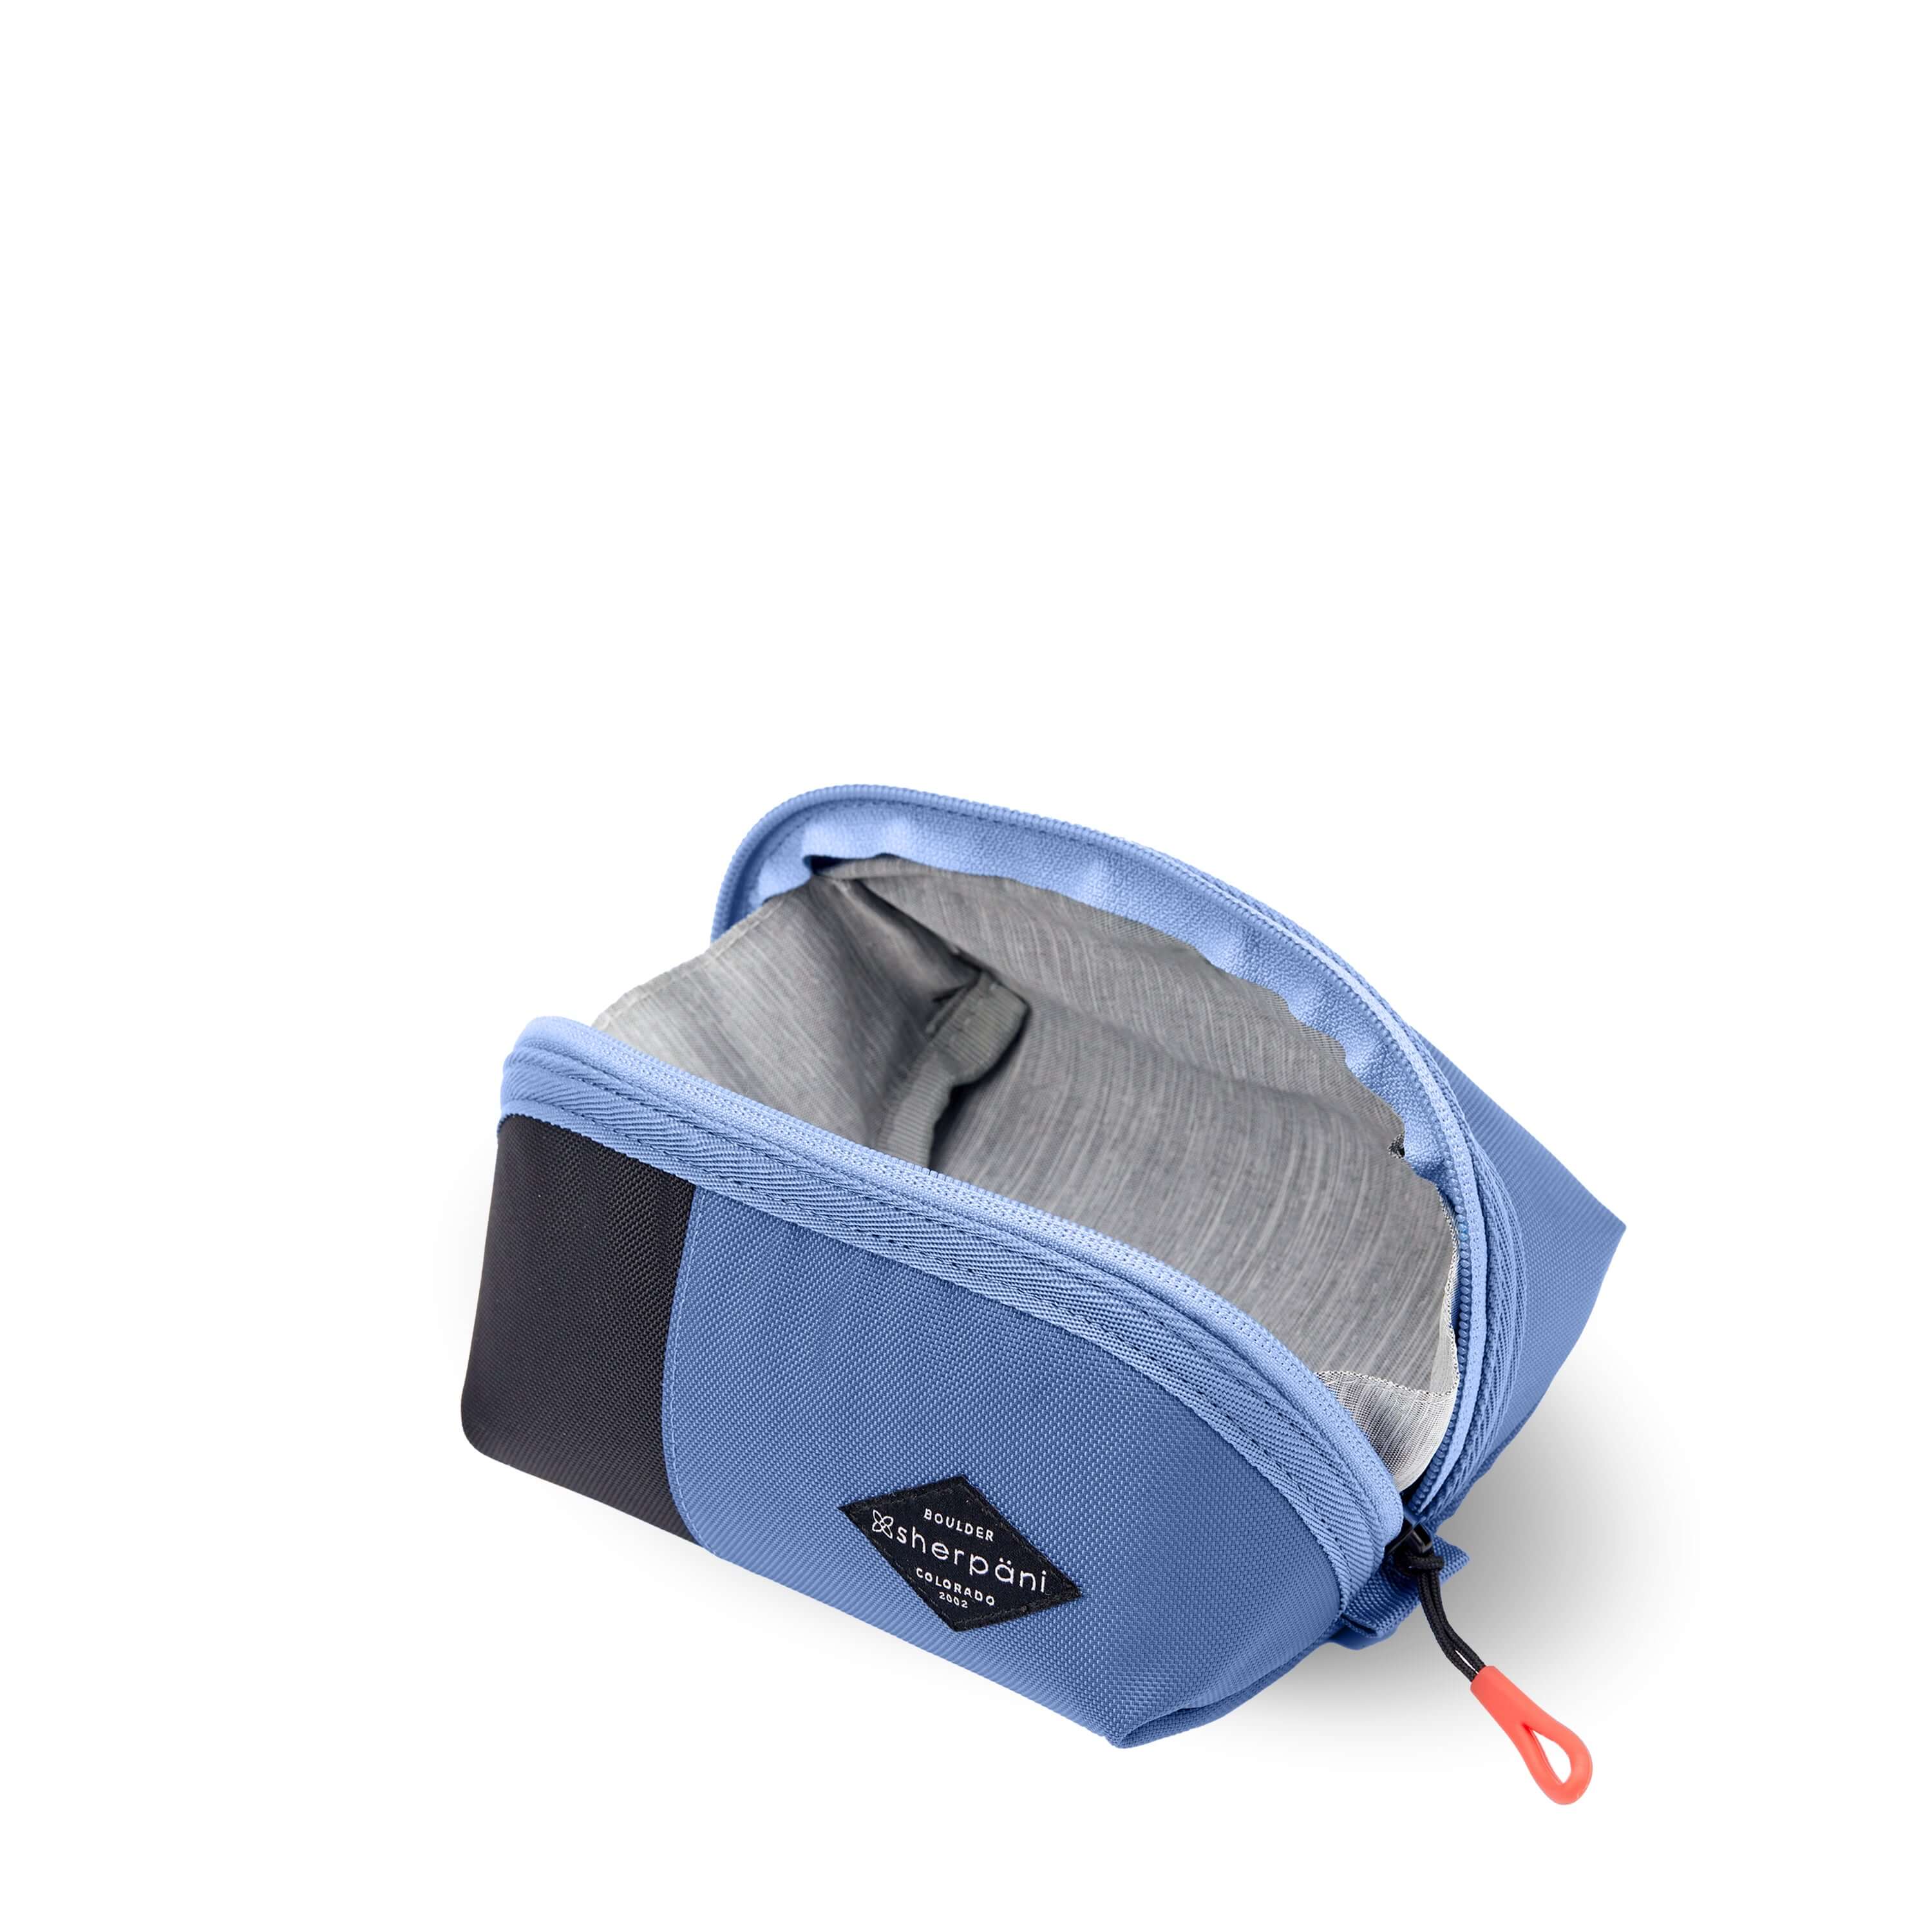 Top view of Sherpani travel accessory the Harmony in Pacific Blue. The pouch is unzipped to reveal a light gray interior. 